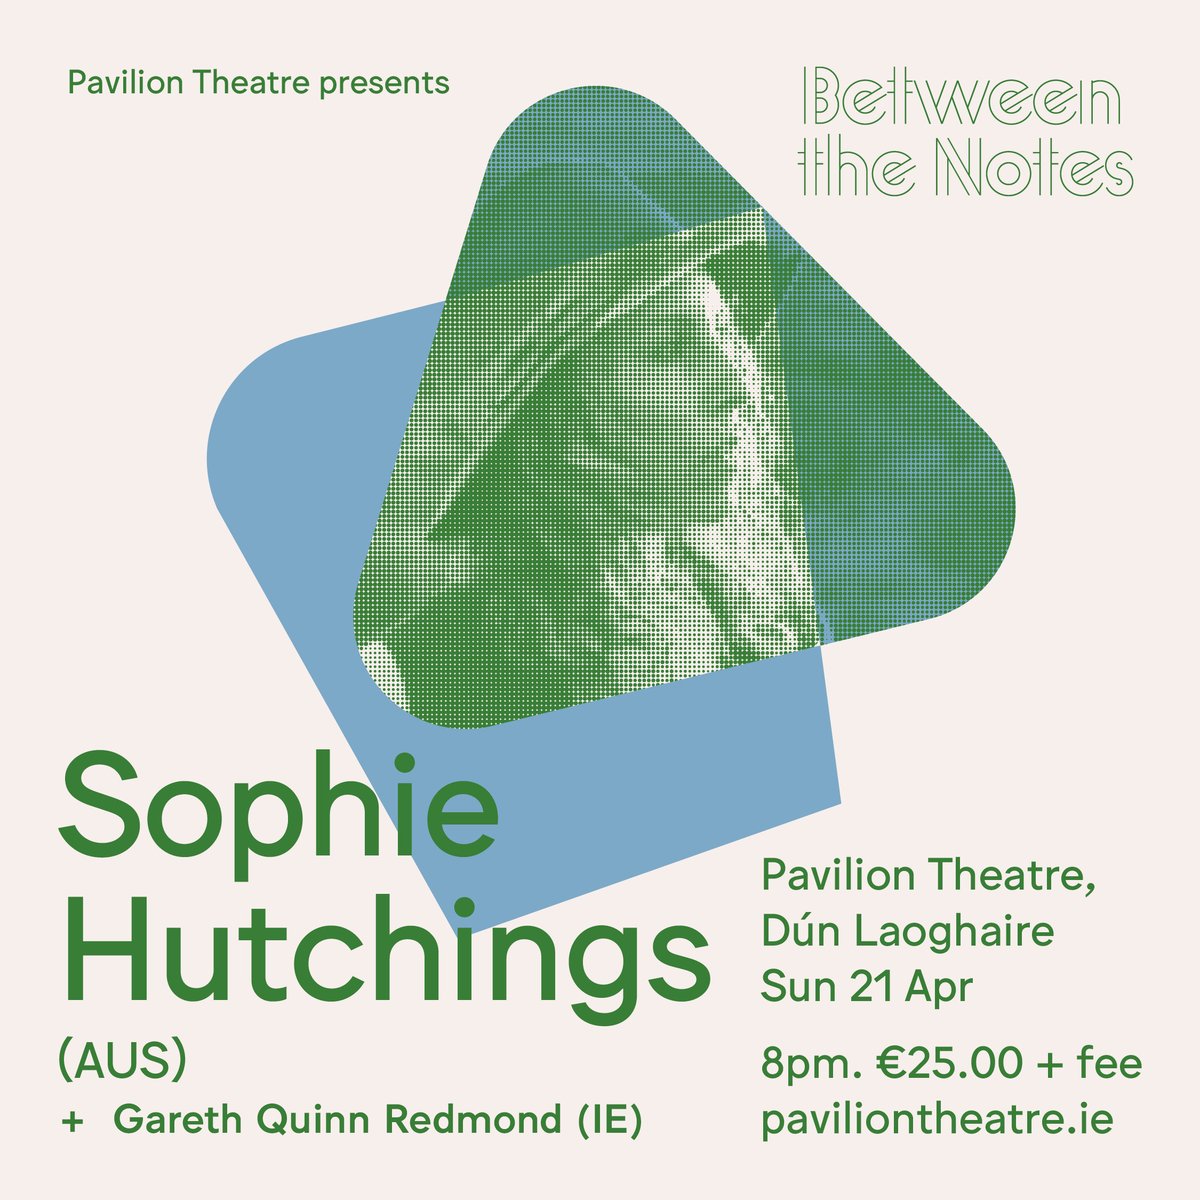 📢 SUPPORT ANNOUNCEMENT Aussie pianist/composer @sophhutchings will be supported by Dublin-based ambient musician @GarethQR for her debut Irish concert on Sun 21 Apr This is going to be a really special one, don't miss it #BetweenTheNotes Tickets: tinyurl.com/44zanvbm